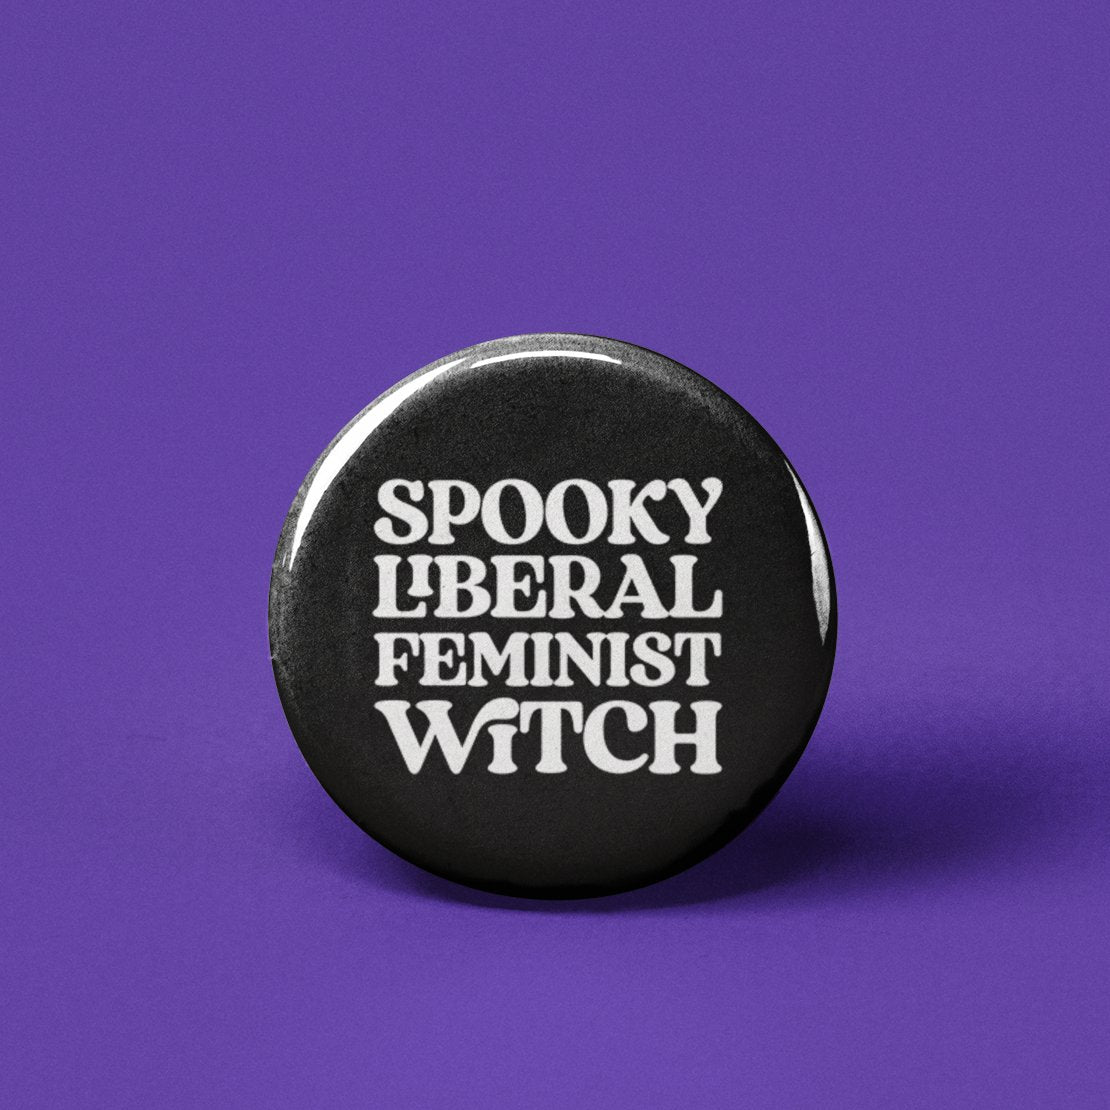 Spooky Liberal Feminist Witch Pinback Button - Spiral Circle